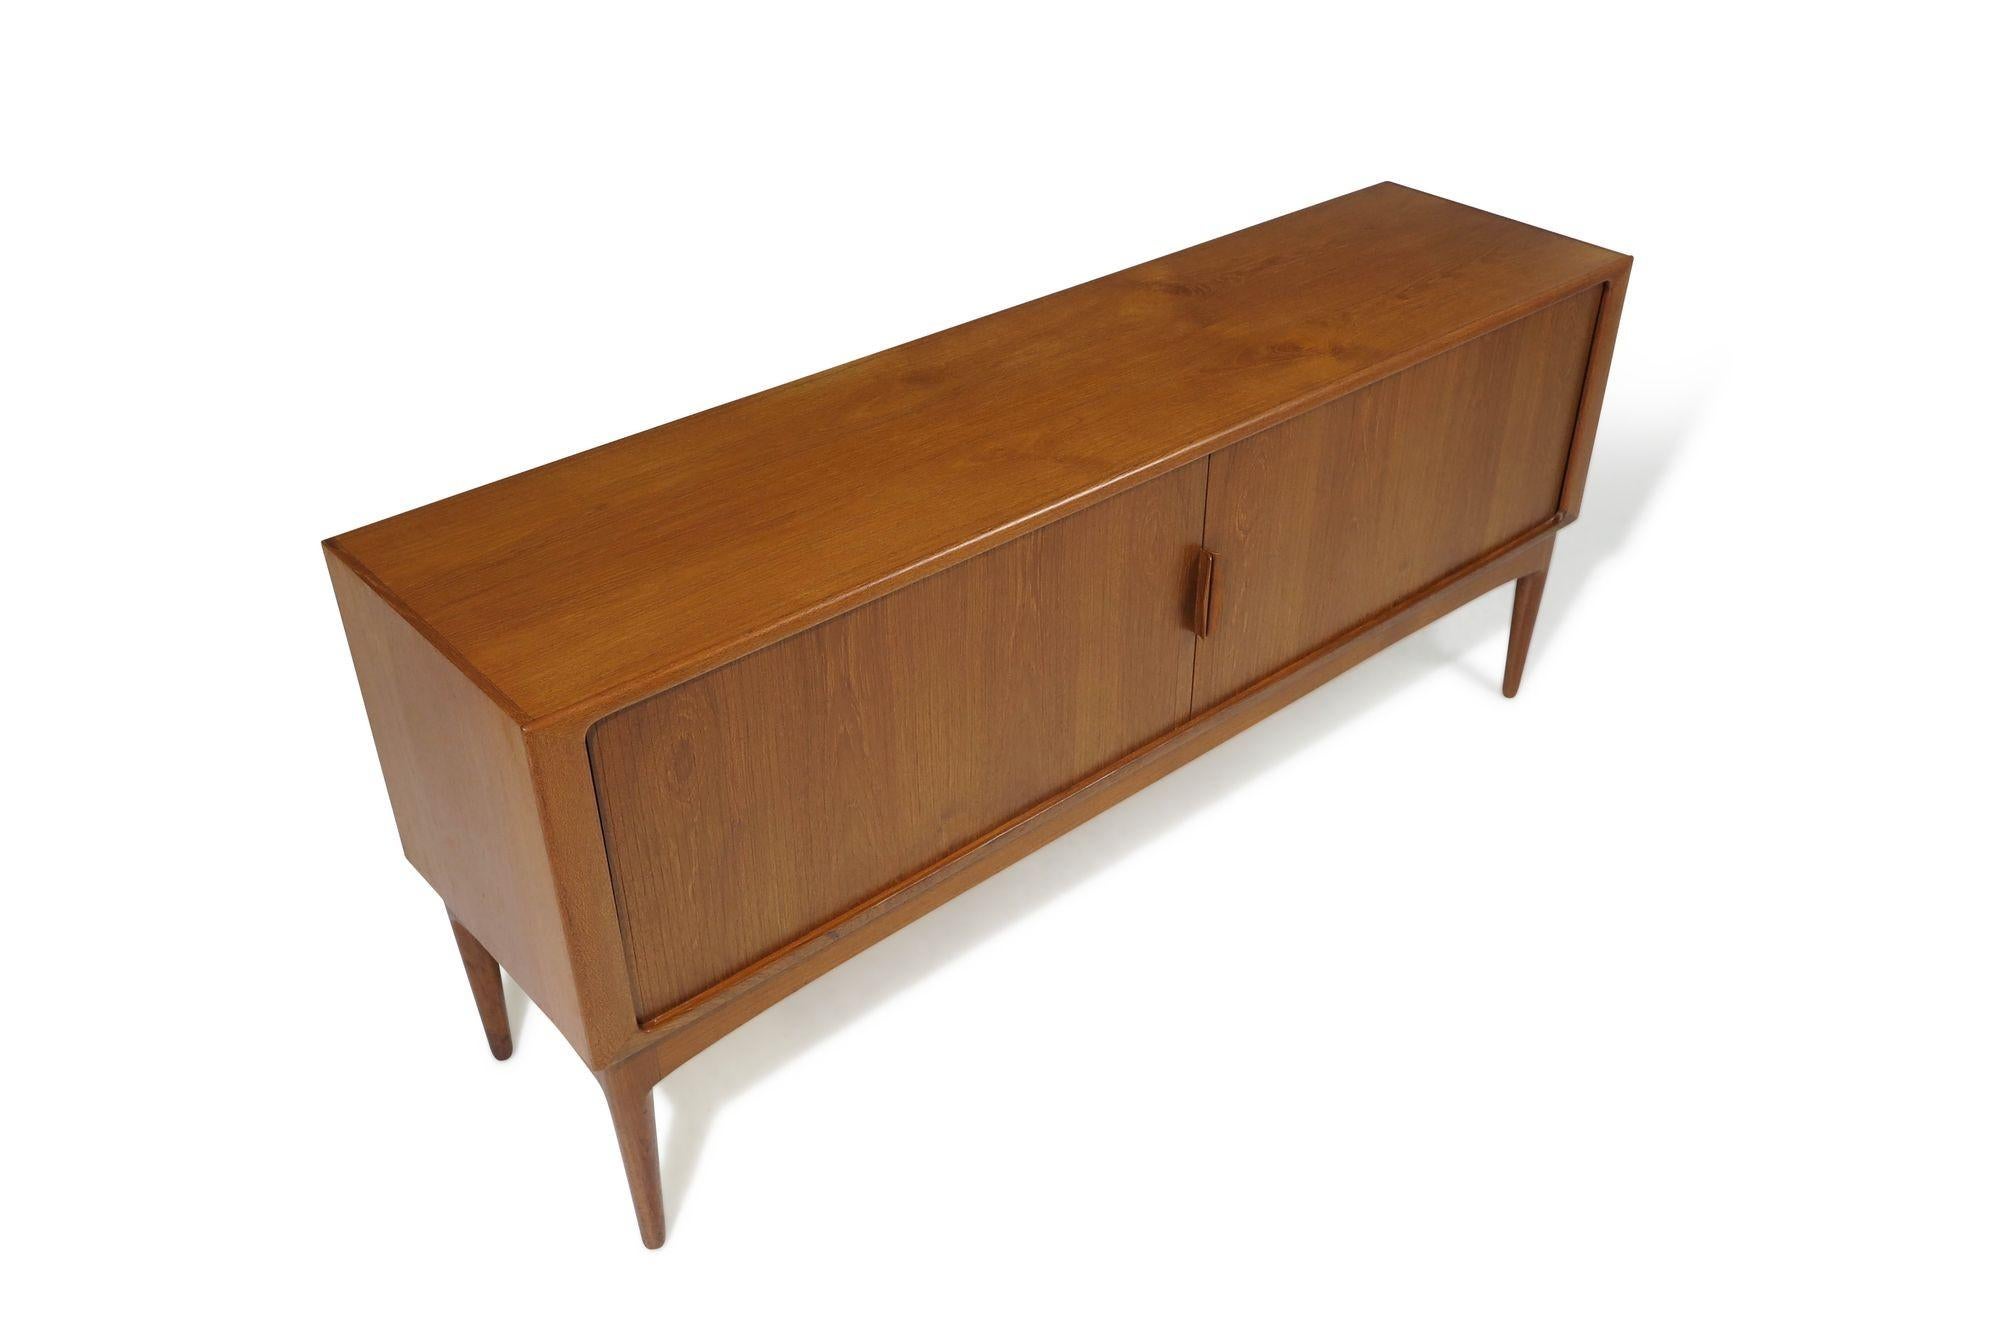 20th Century Johannes Andersen Teak Credenza with Sculpted Pulls For Sale